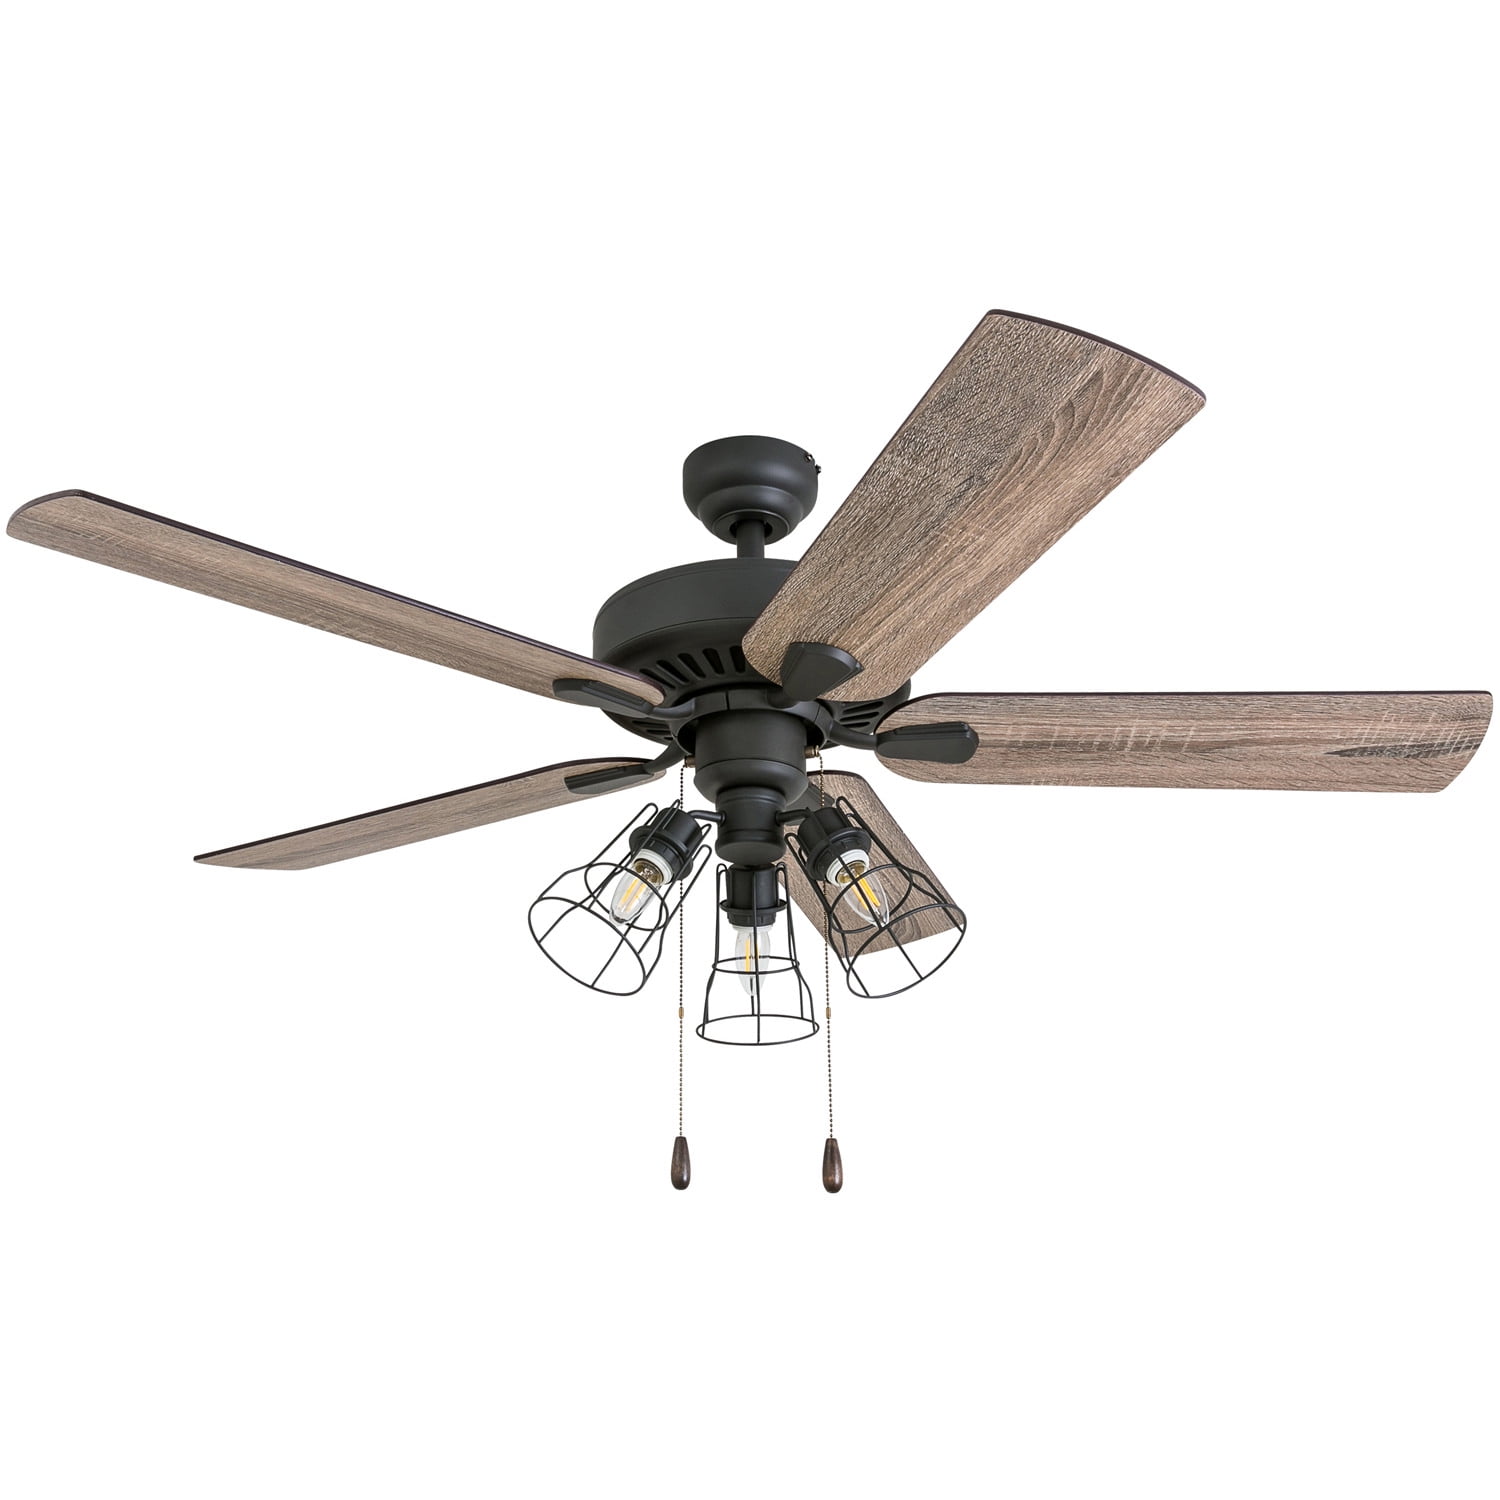 Prominence Home Inland Seas Farmhouse 52" Aged Bronze LED Ceiling Fan 3 Light IL 